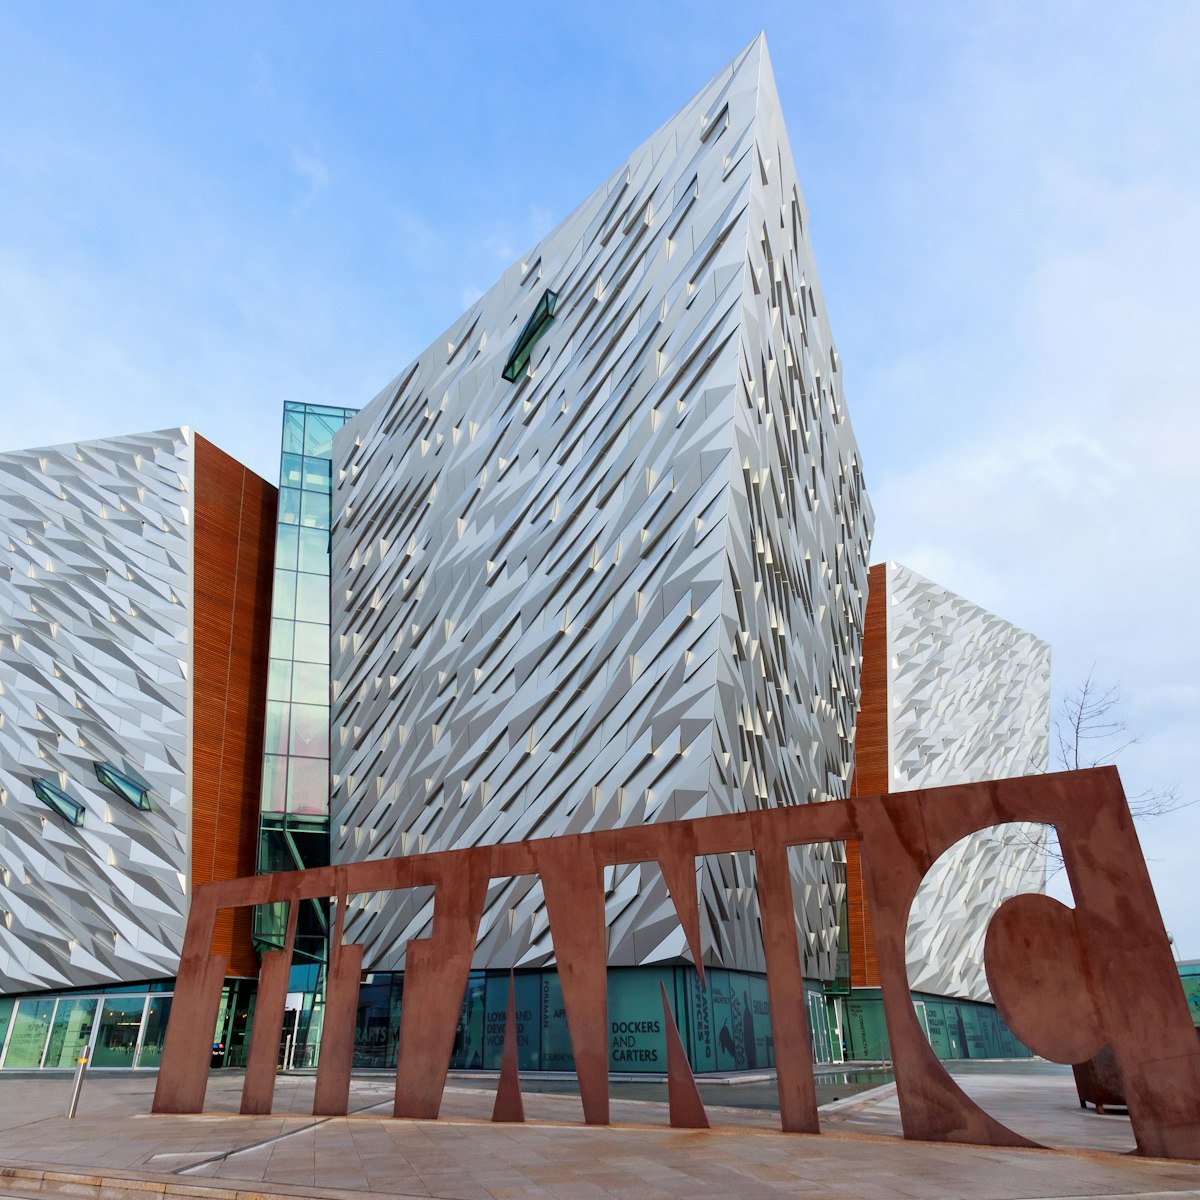 BELFAST, NORTHERN IRELAND - FEB 9, 2014: The Titanic visitor attraction and a monument in Belfast, Northern Ireland. Opened in 2012, this is the Titanic sign in front of the entrance.